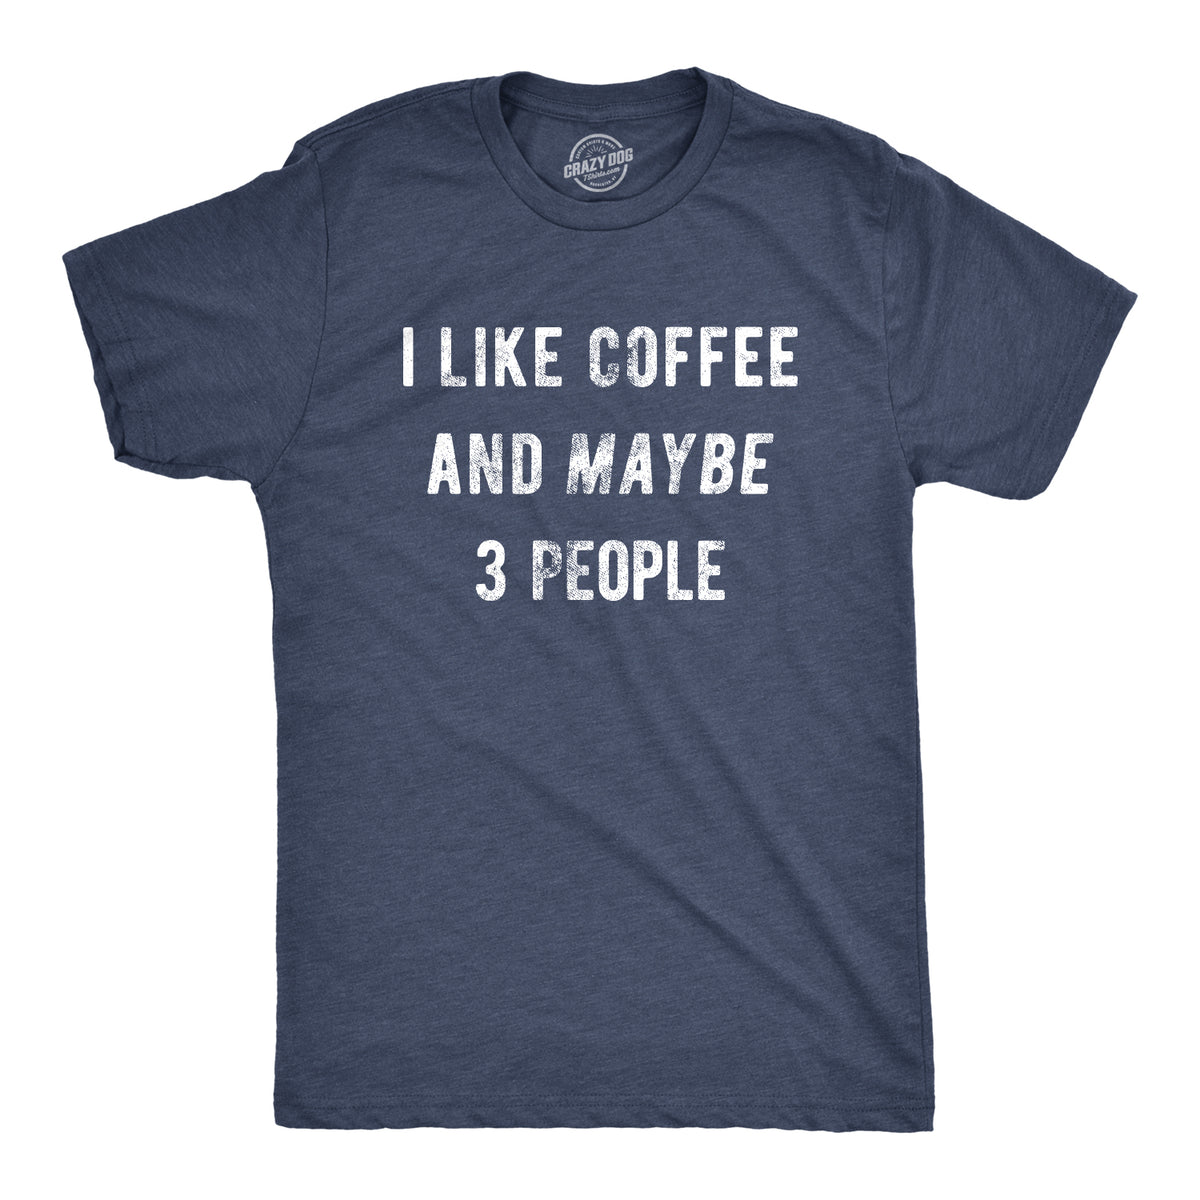 Funny Heather Navy I Like Coffee And Maybe 3 People Mens T Shirt Nerdy Coffee Introvert Tee